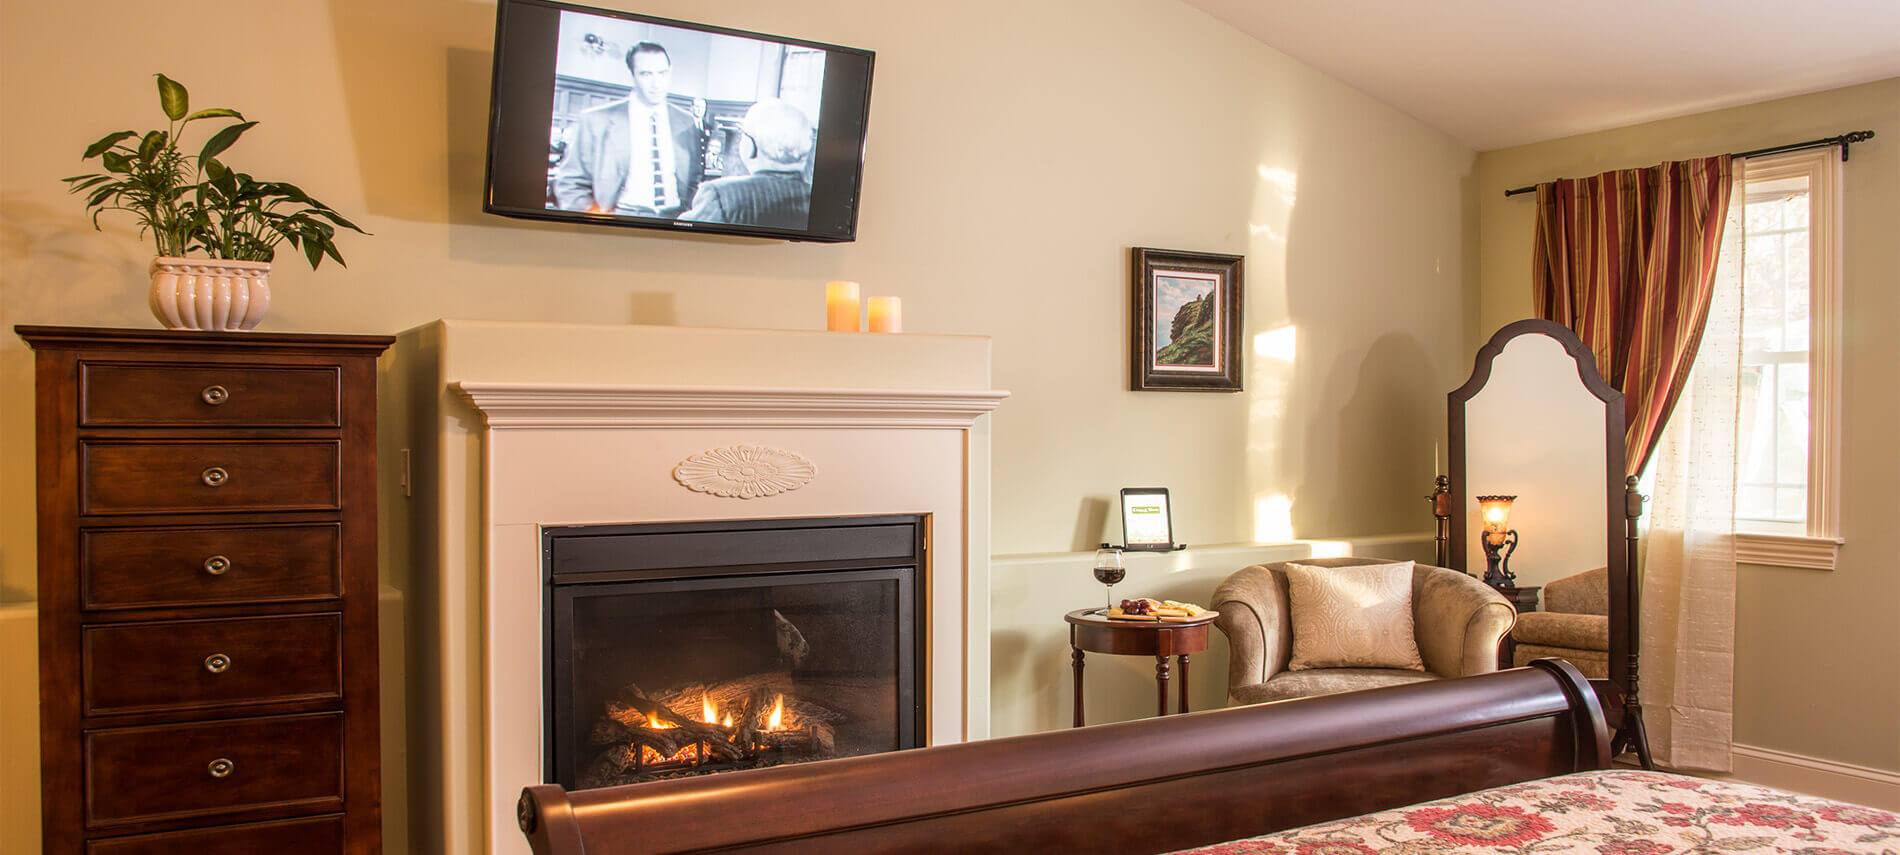 Guestroom features a roaring fireplace. Luxurious mahogany dresser sits next to wall-mounted television